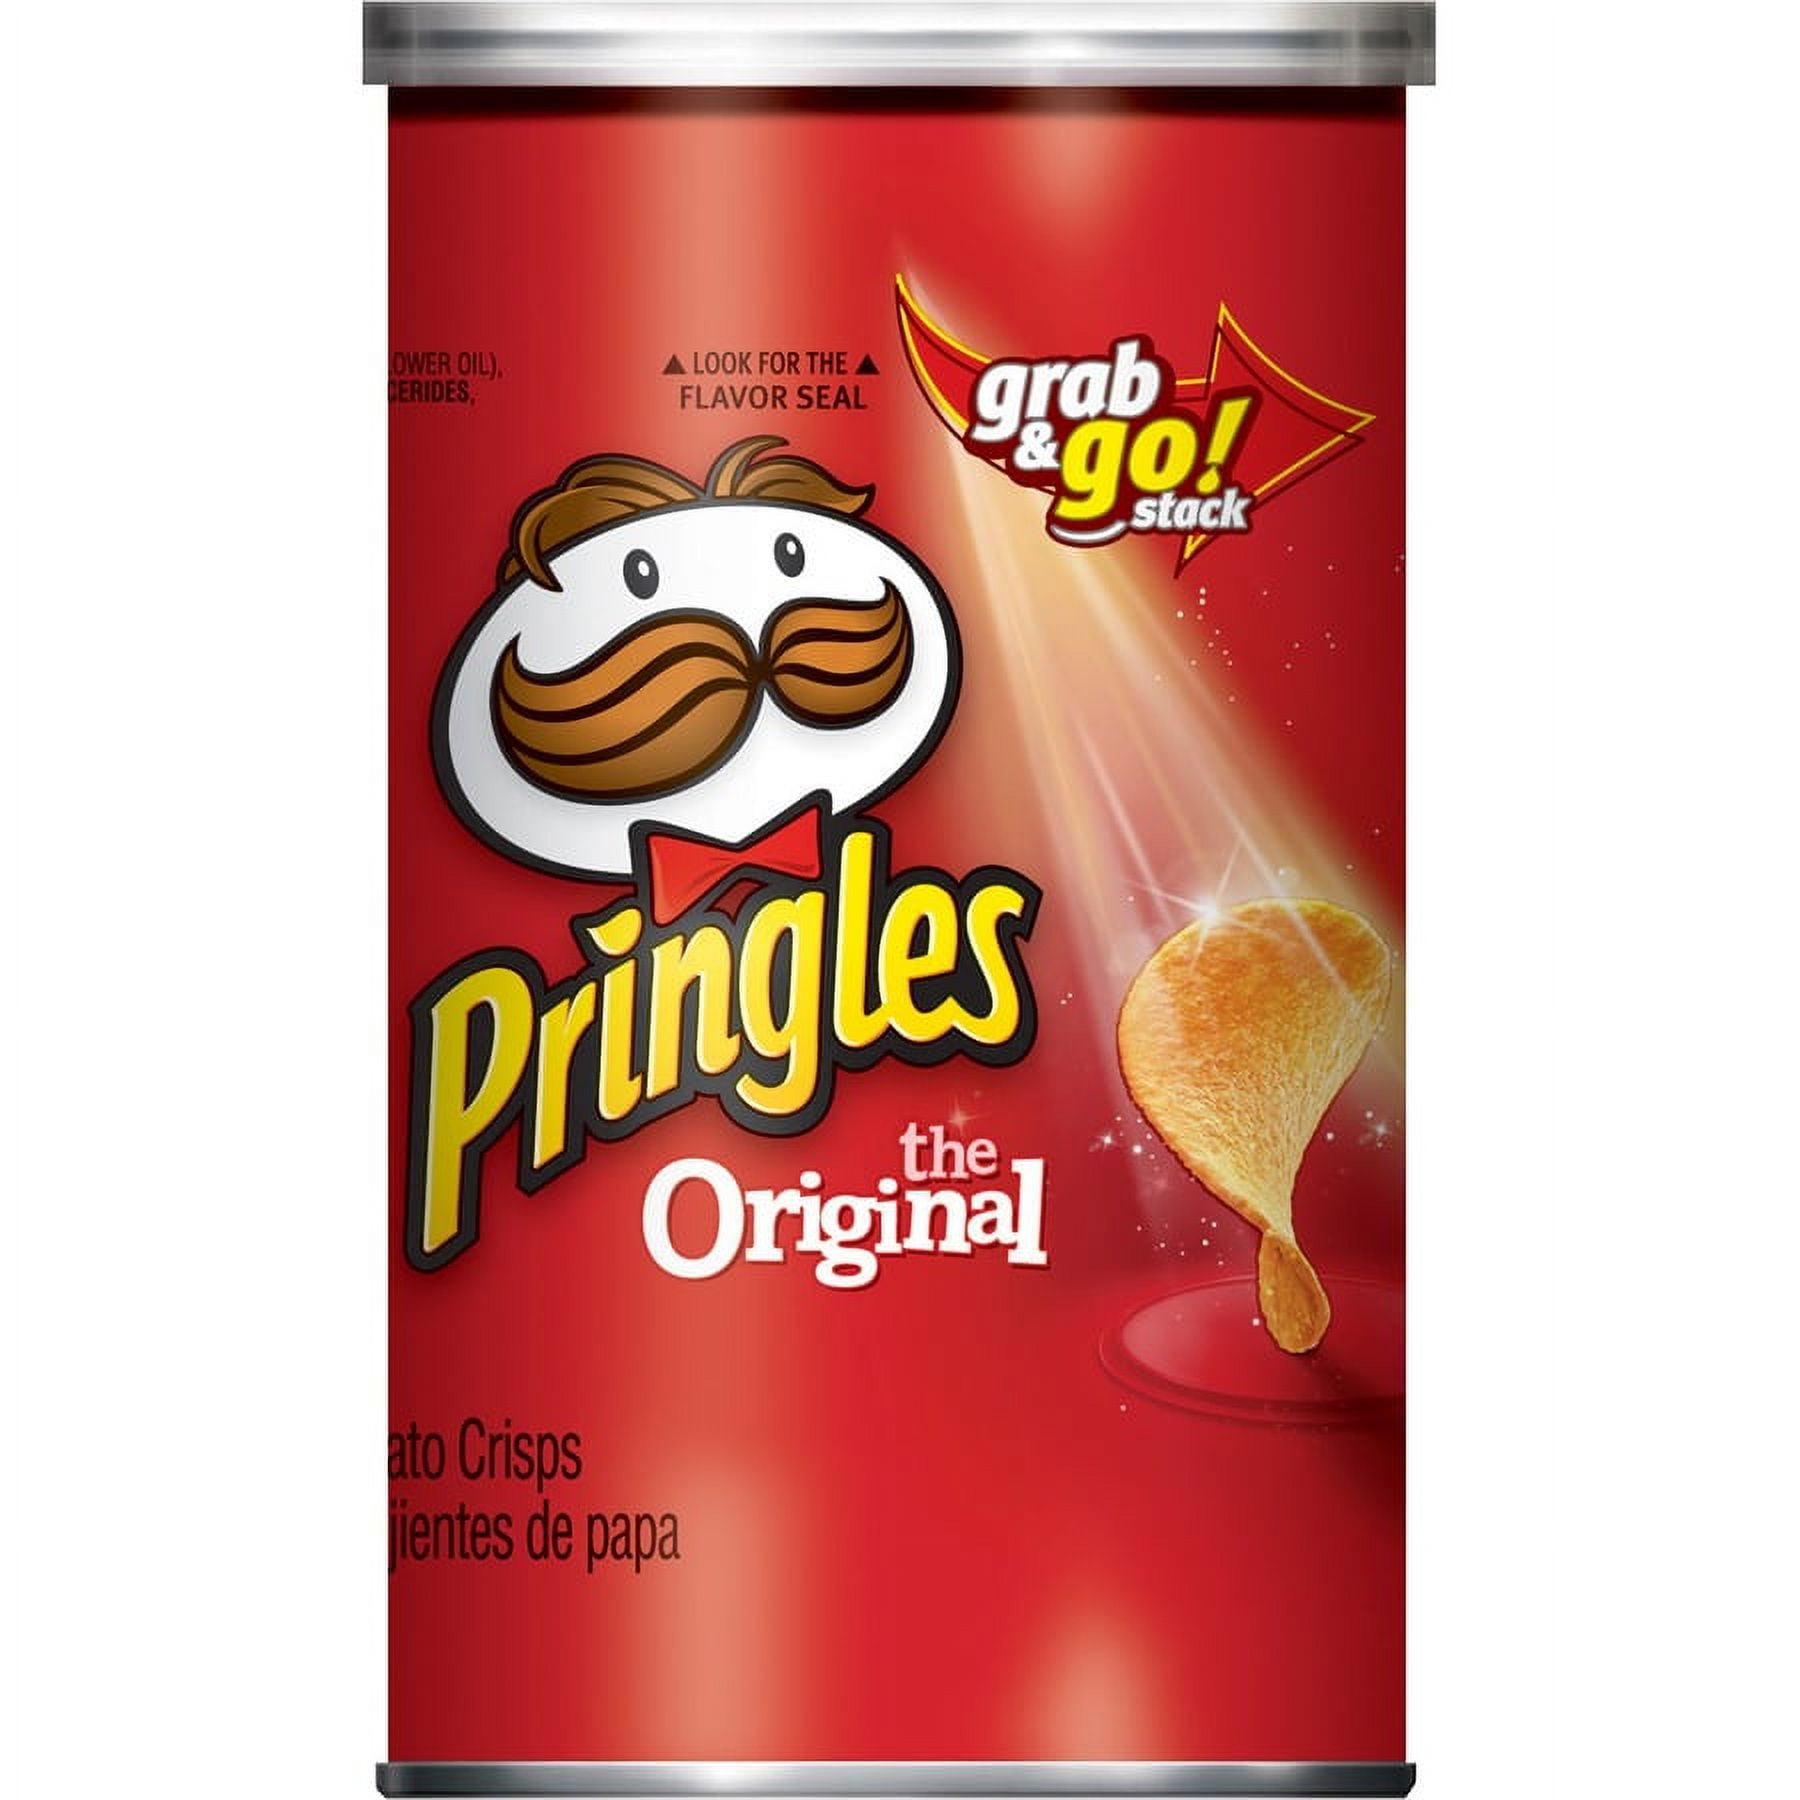 33 Empty Pringles/Stax chip cans ideas